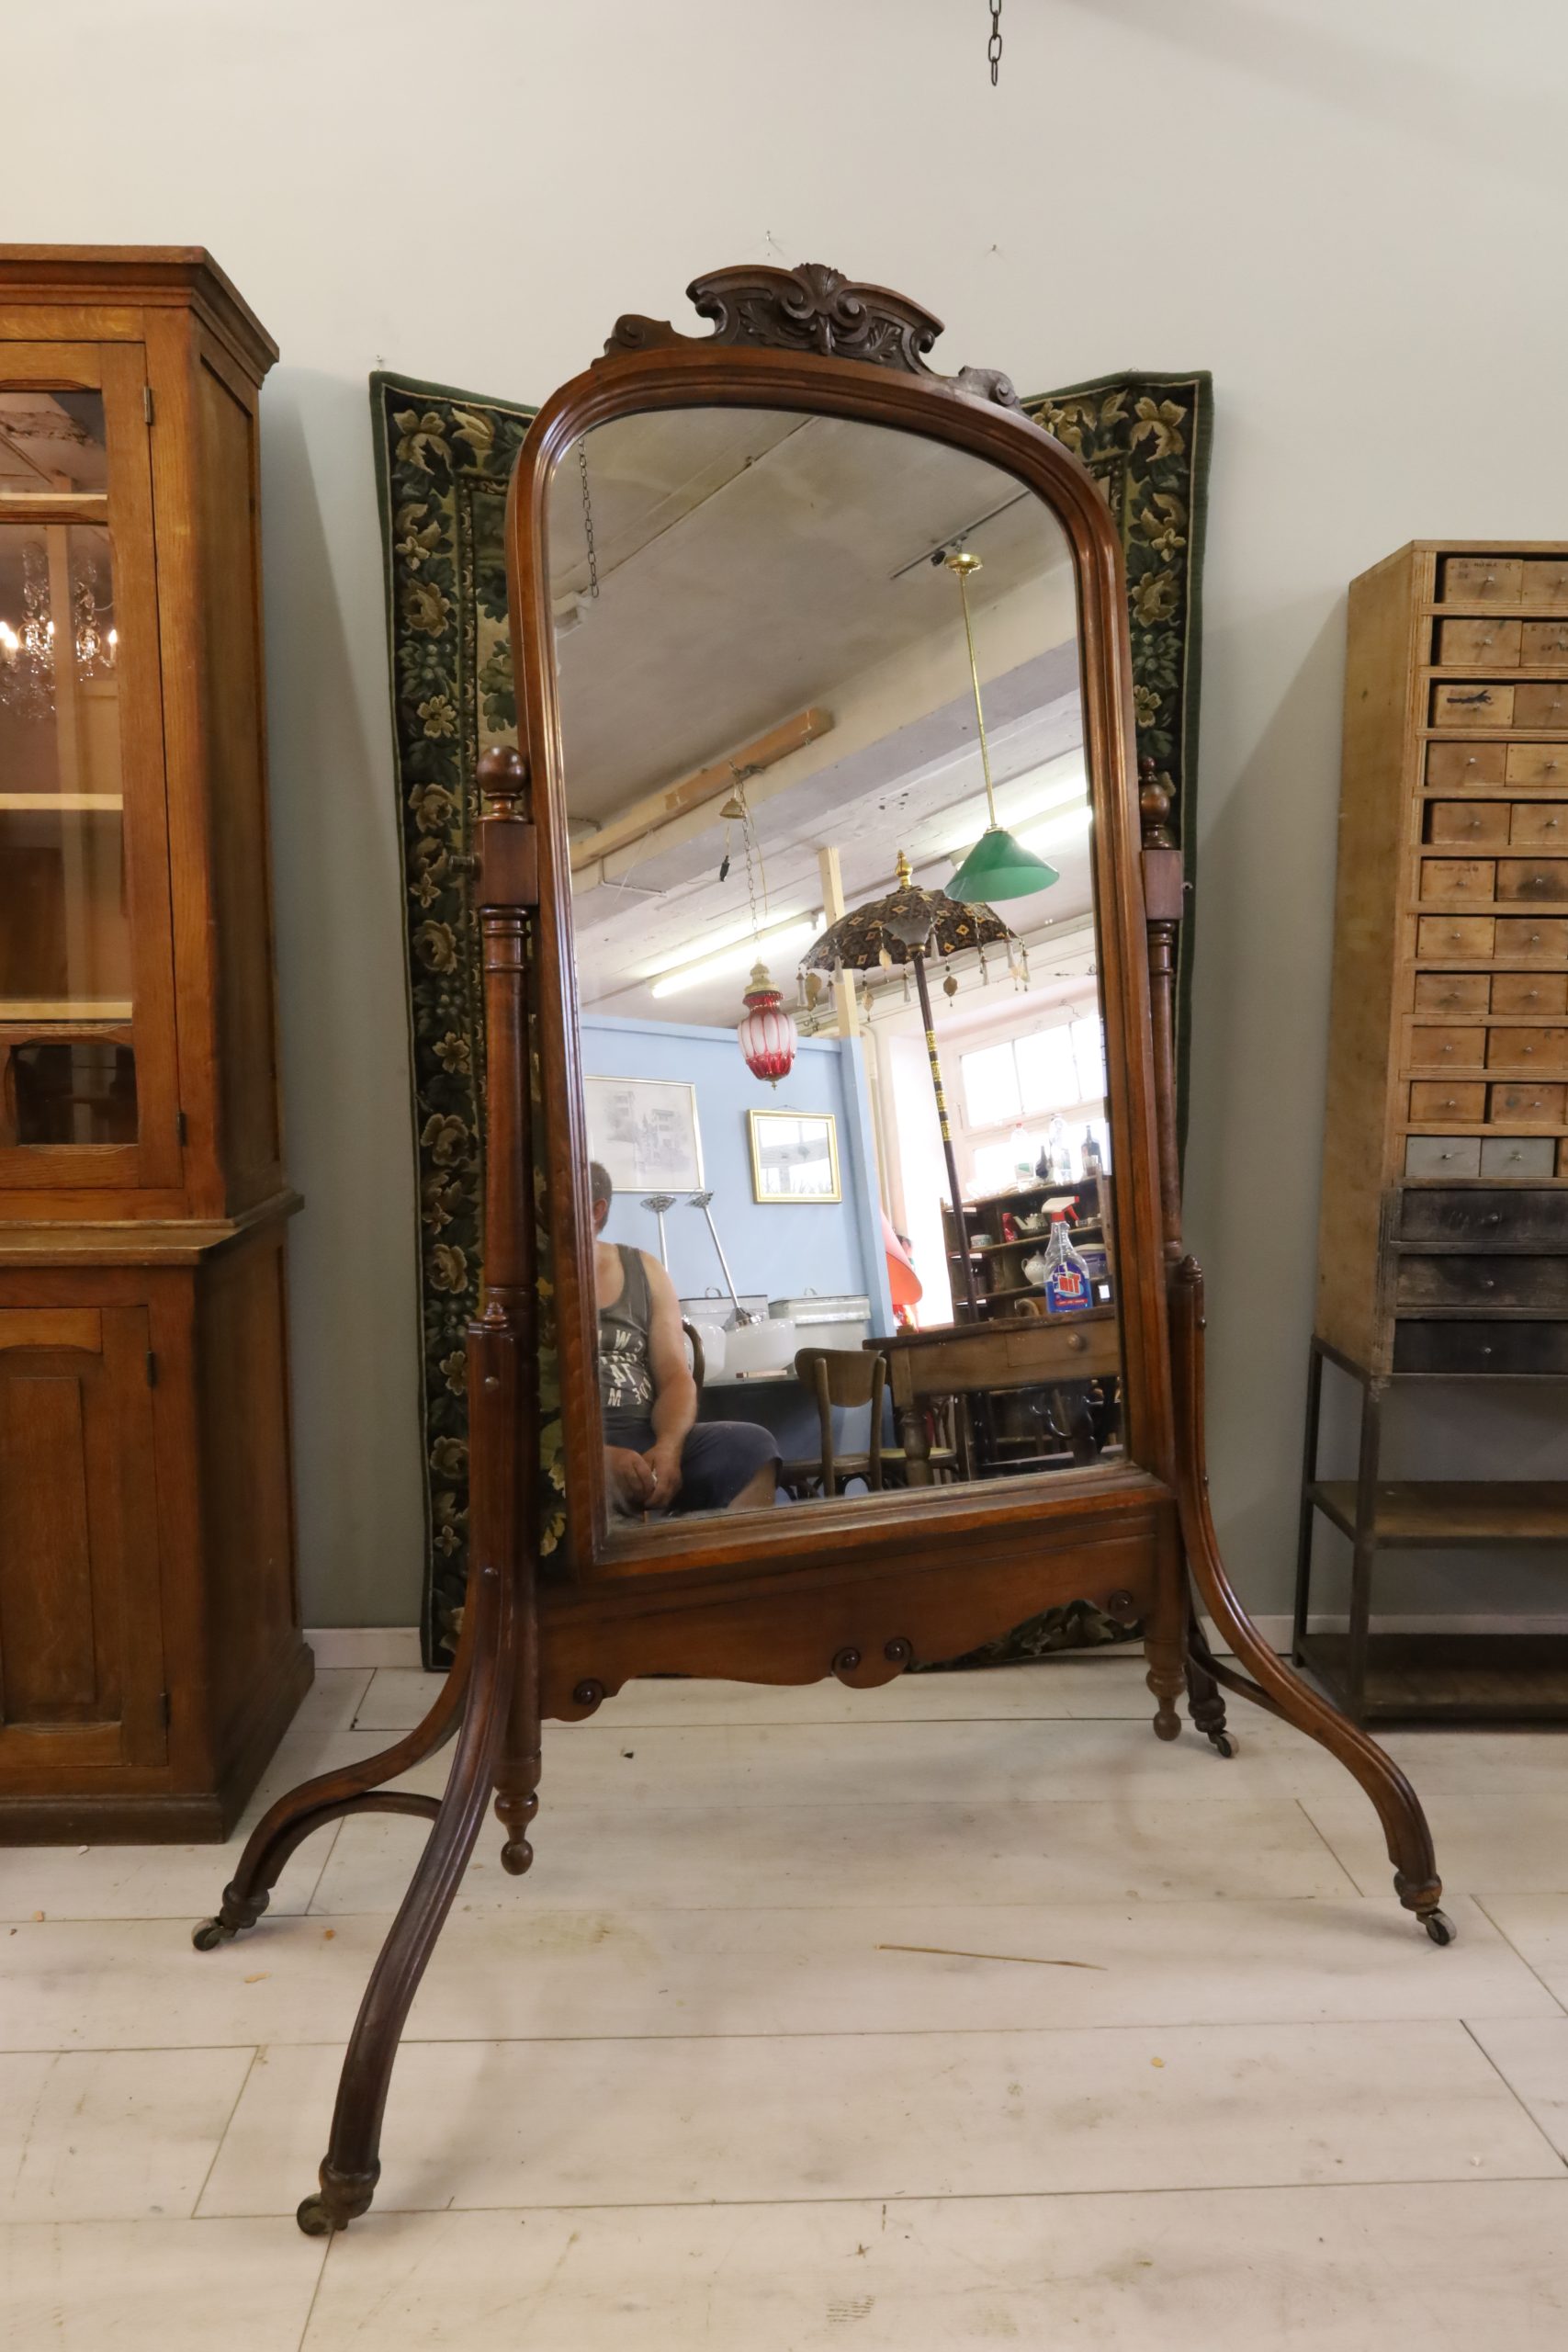 Tiltable mirror in Art Nouveau style - early 20th century